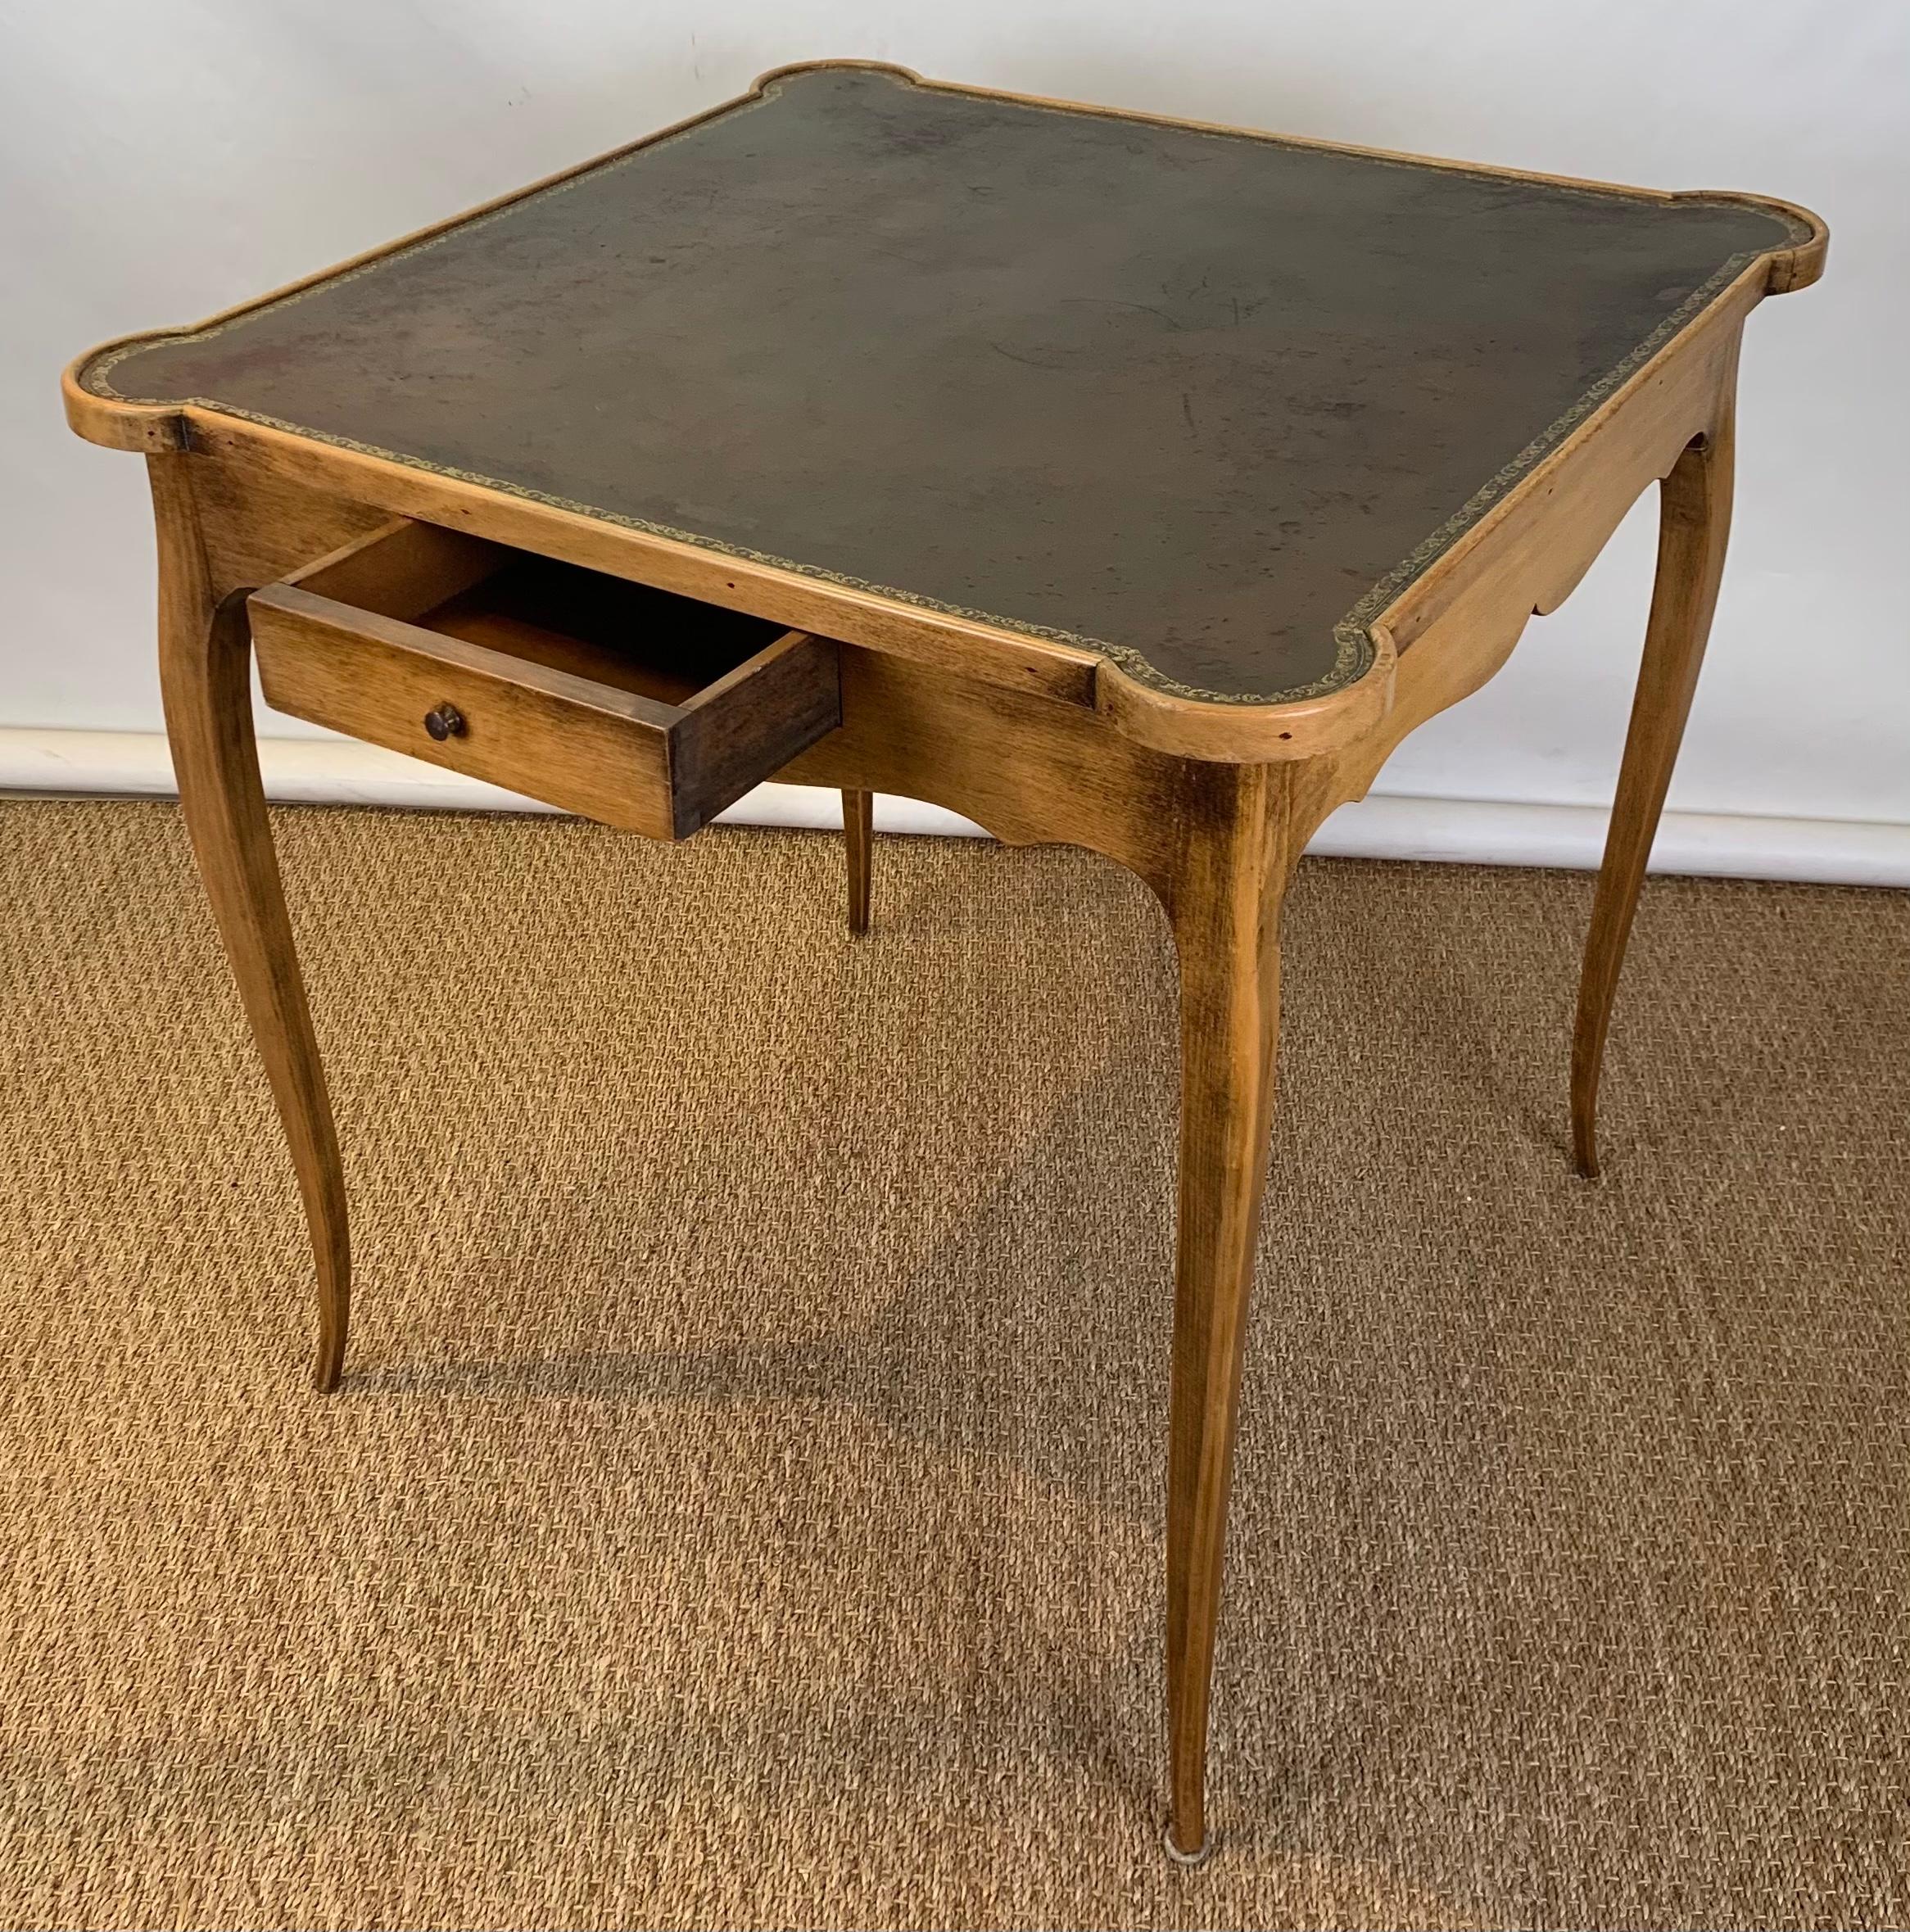 Hand-Crafted Diminutive Leather Topped Games Table